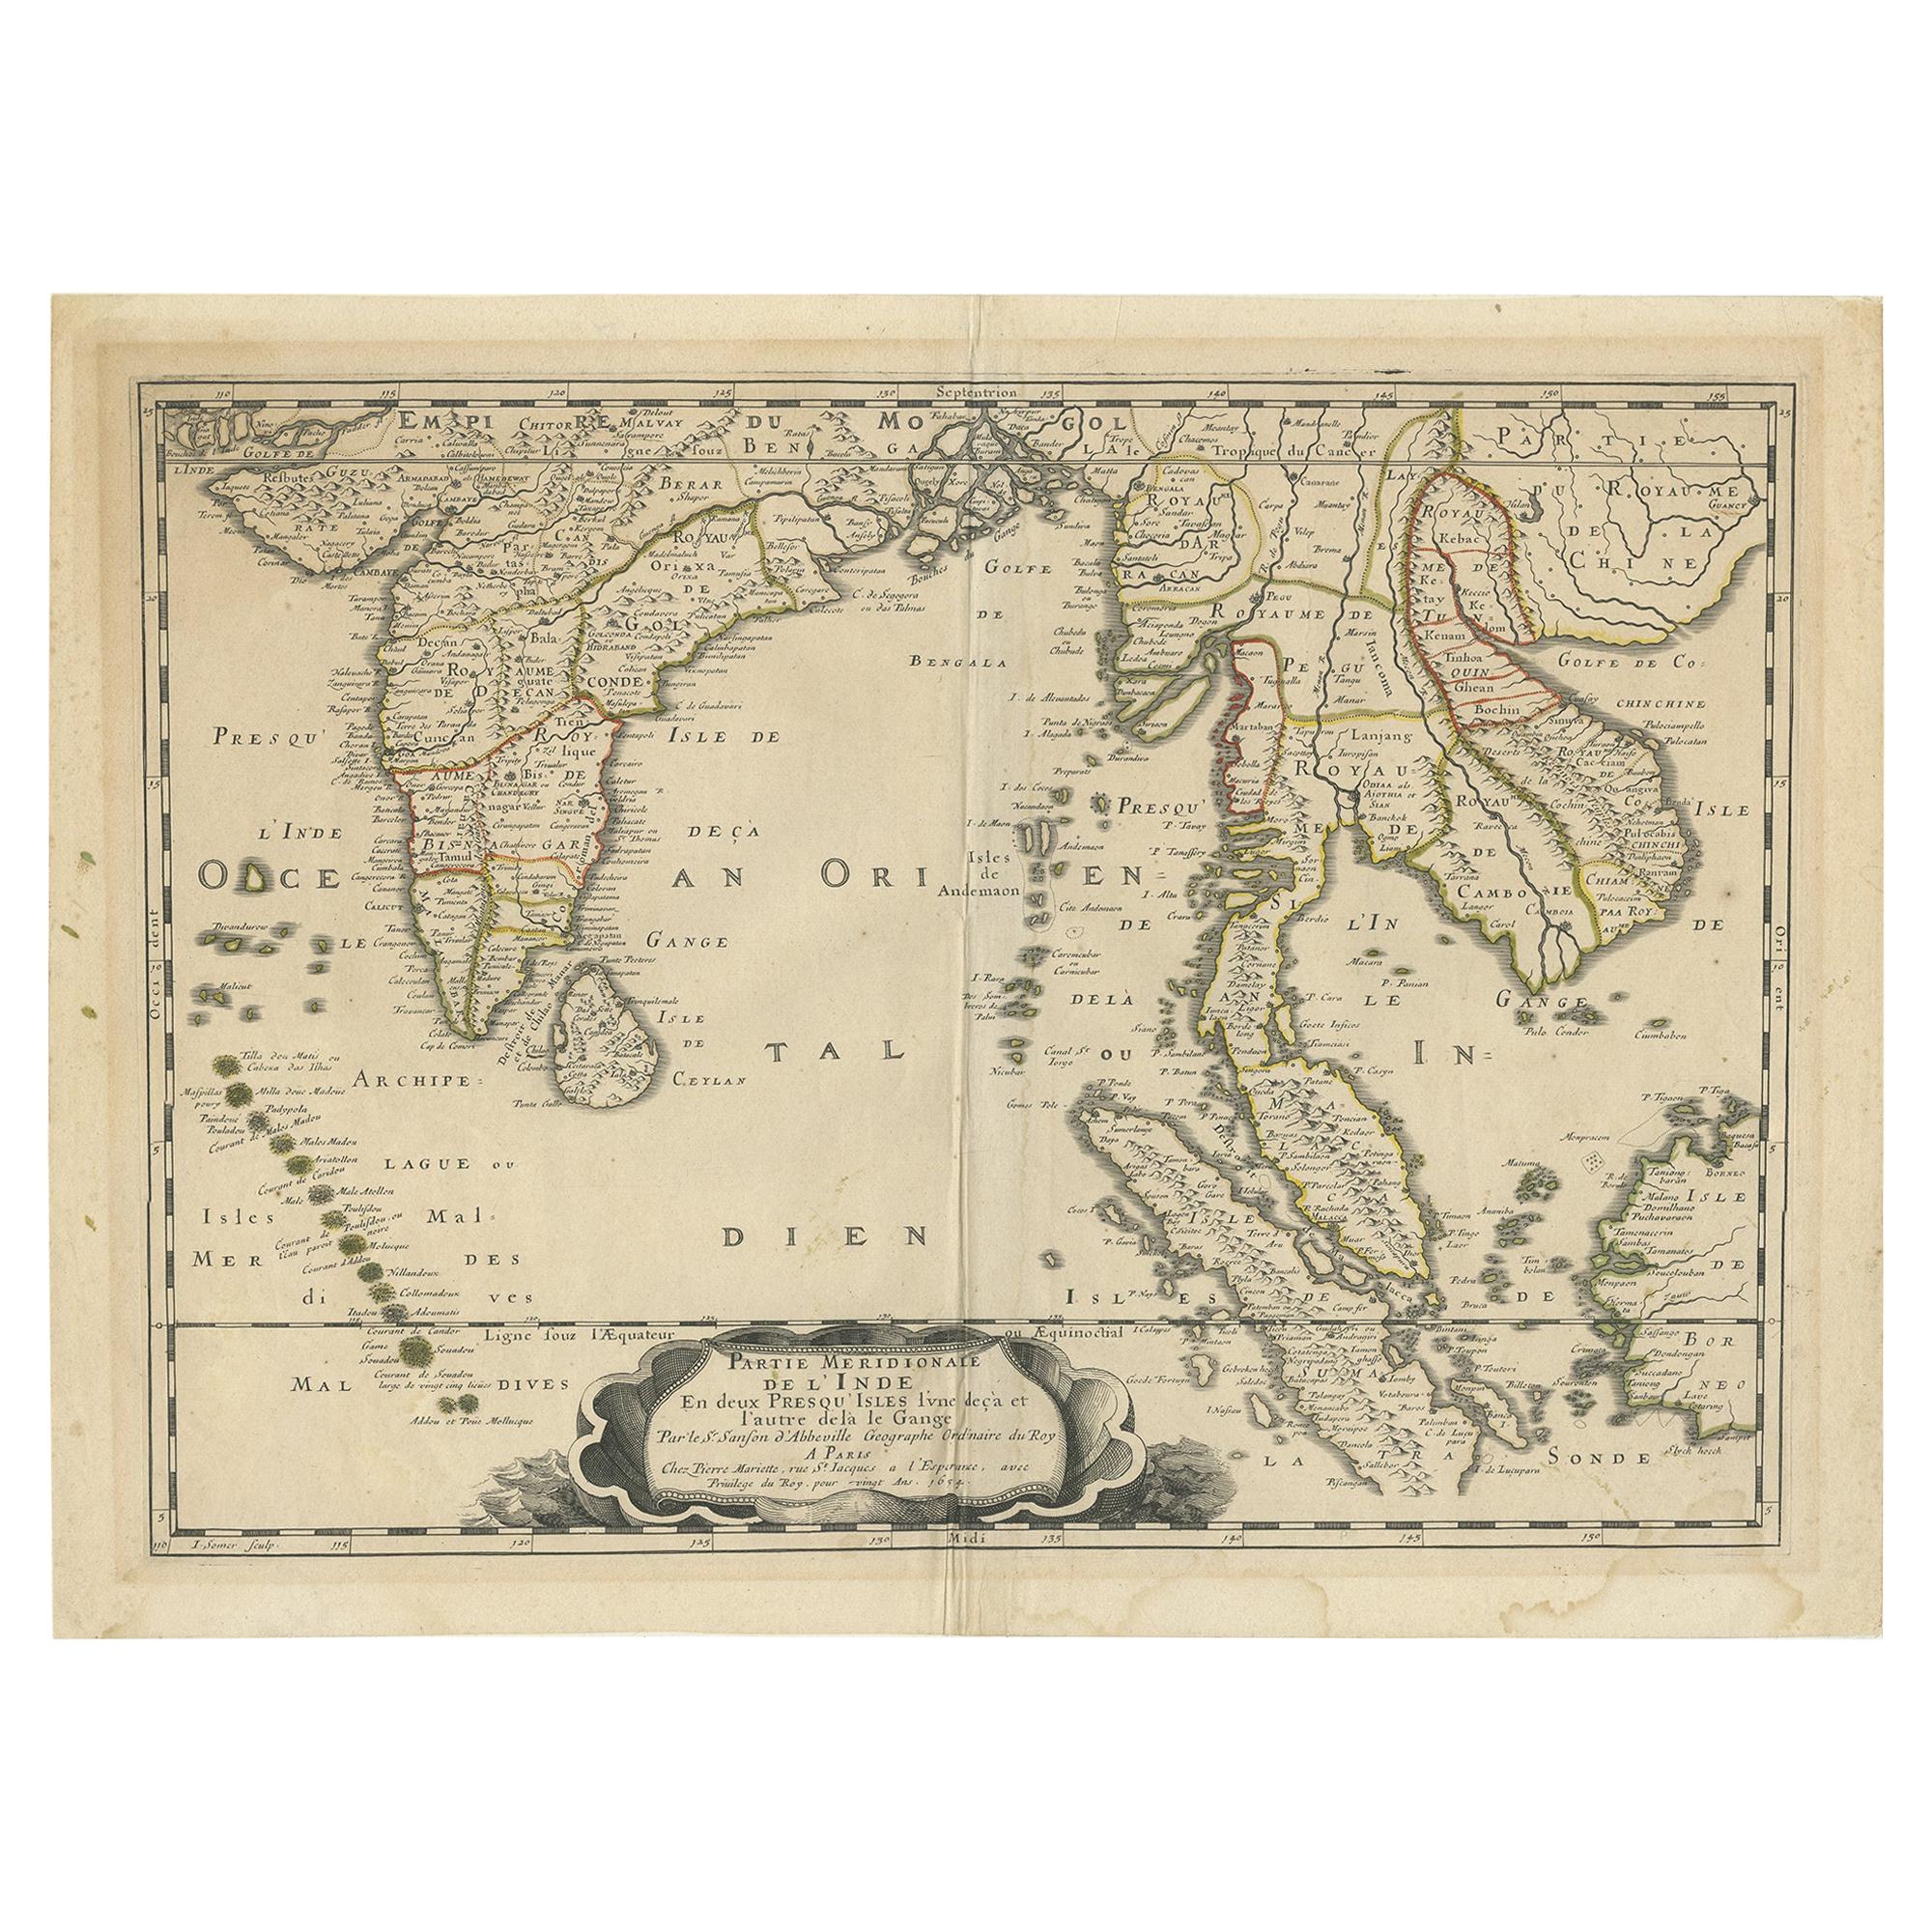 Antique Map of India and Southeast Asia by Sanson, '1654'